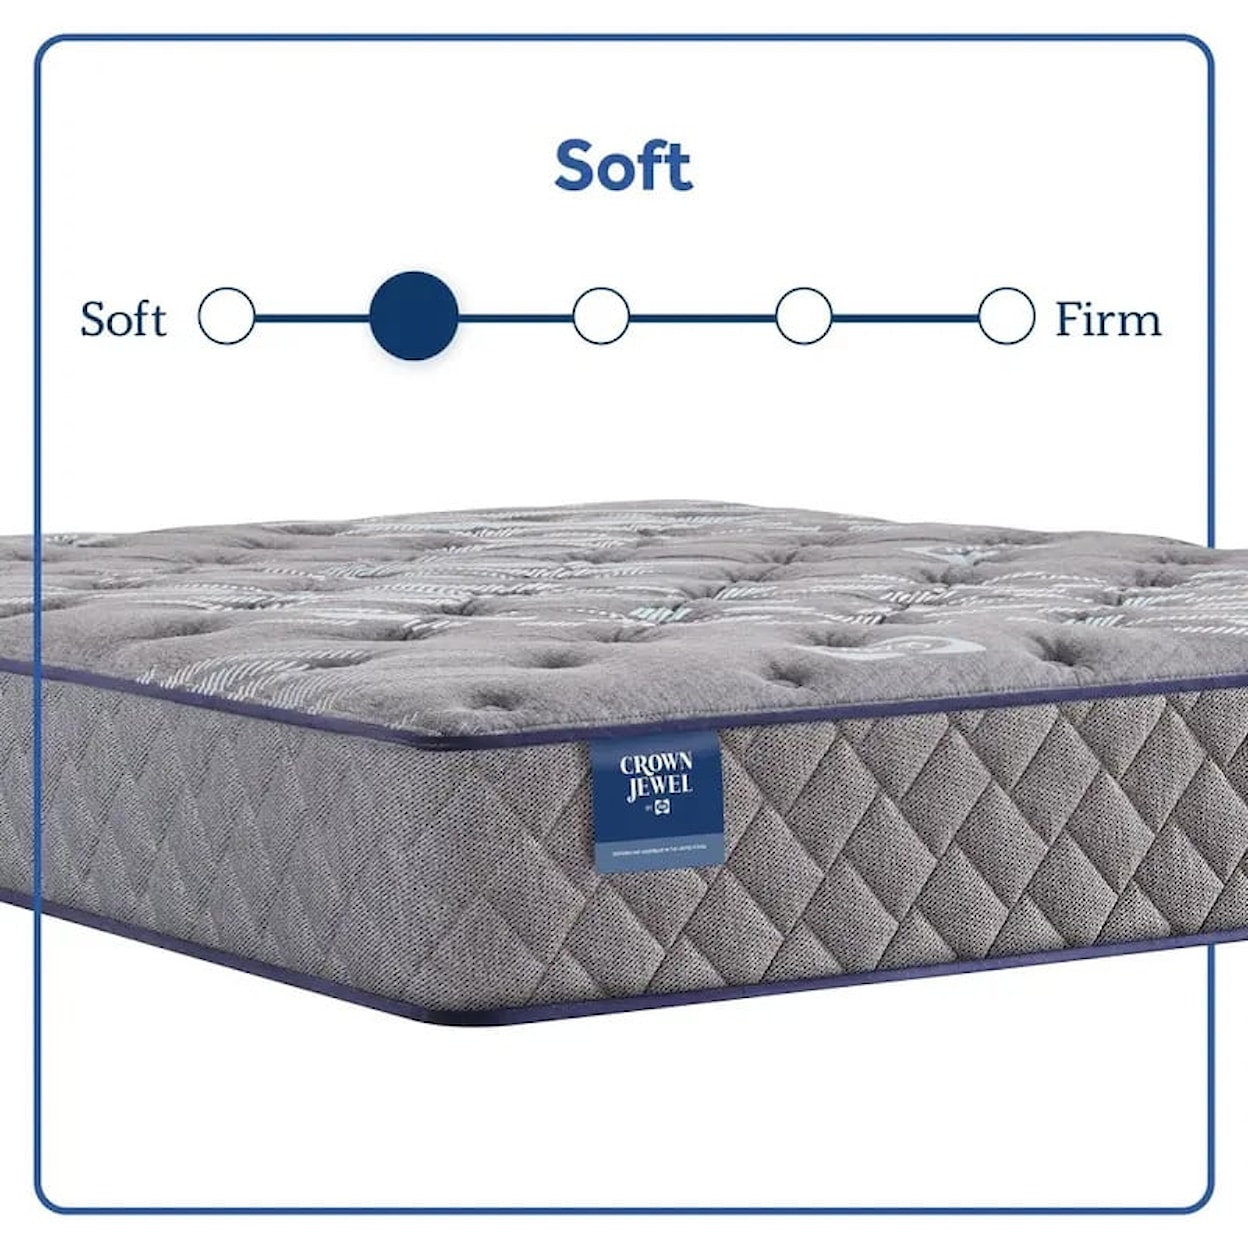 Sealy Sealy Crown Jewel Opal House Soft Queen Mattress